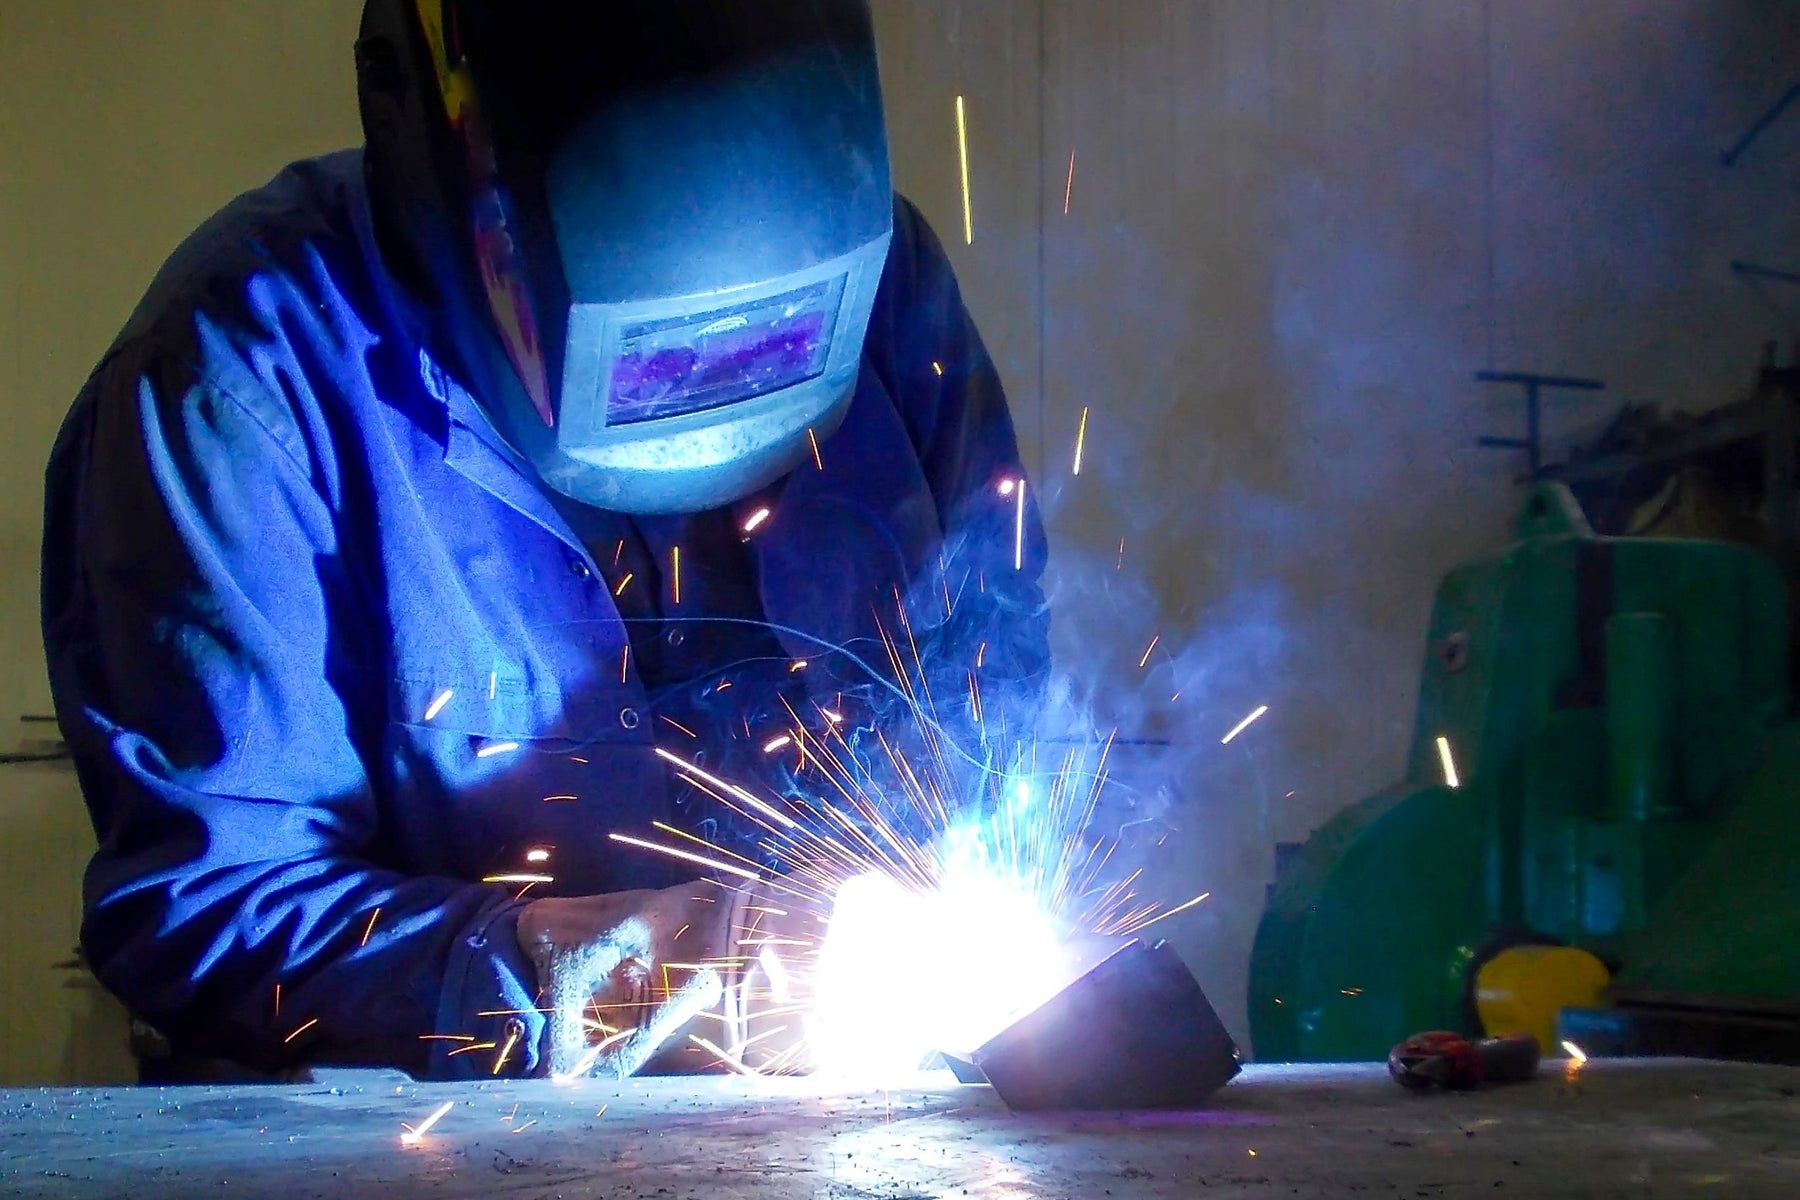 Flux Core vs. MIG Welding: What Is the Difference?